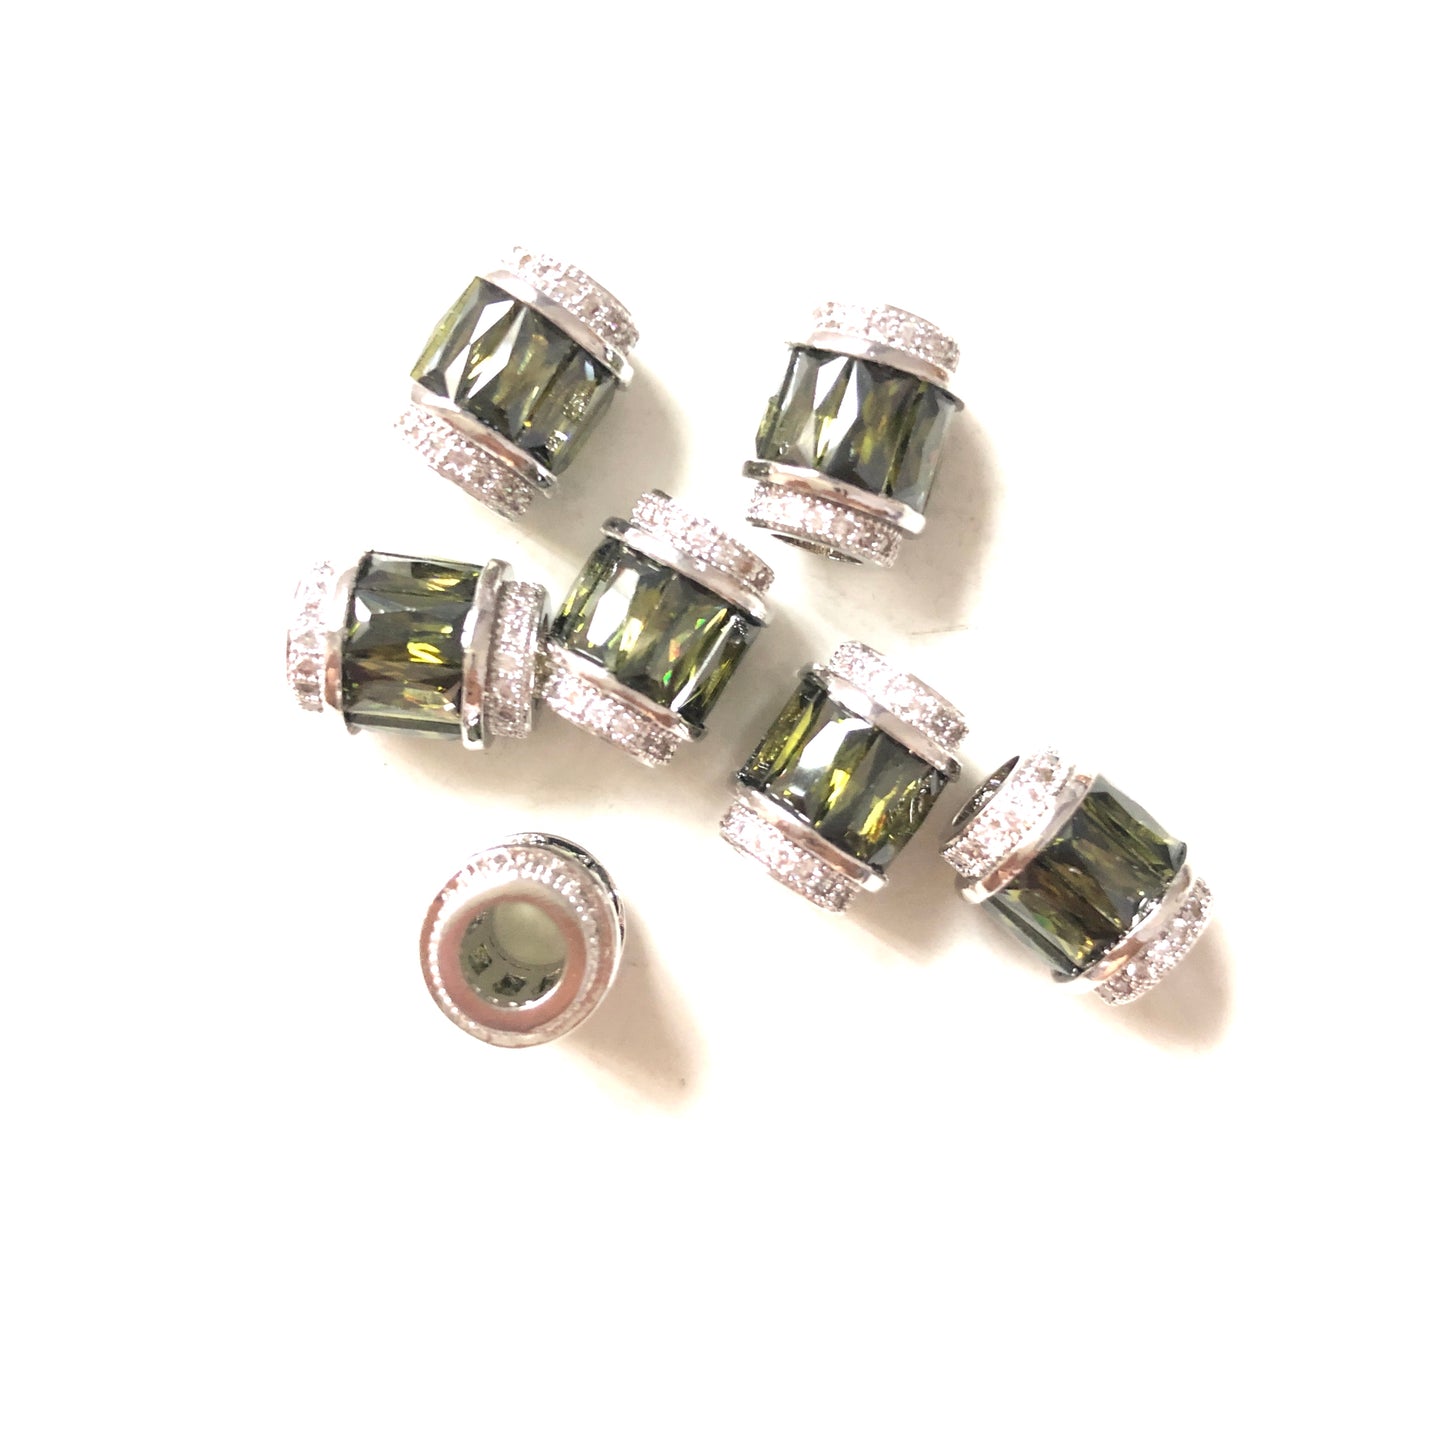 10pcs/lot 12*10mm Green CZ Paved Big Hole Spacers Silver CZ Paved Spacers Big Hole Beads New Spacers Arrivals Charms Beads Beyond